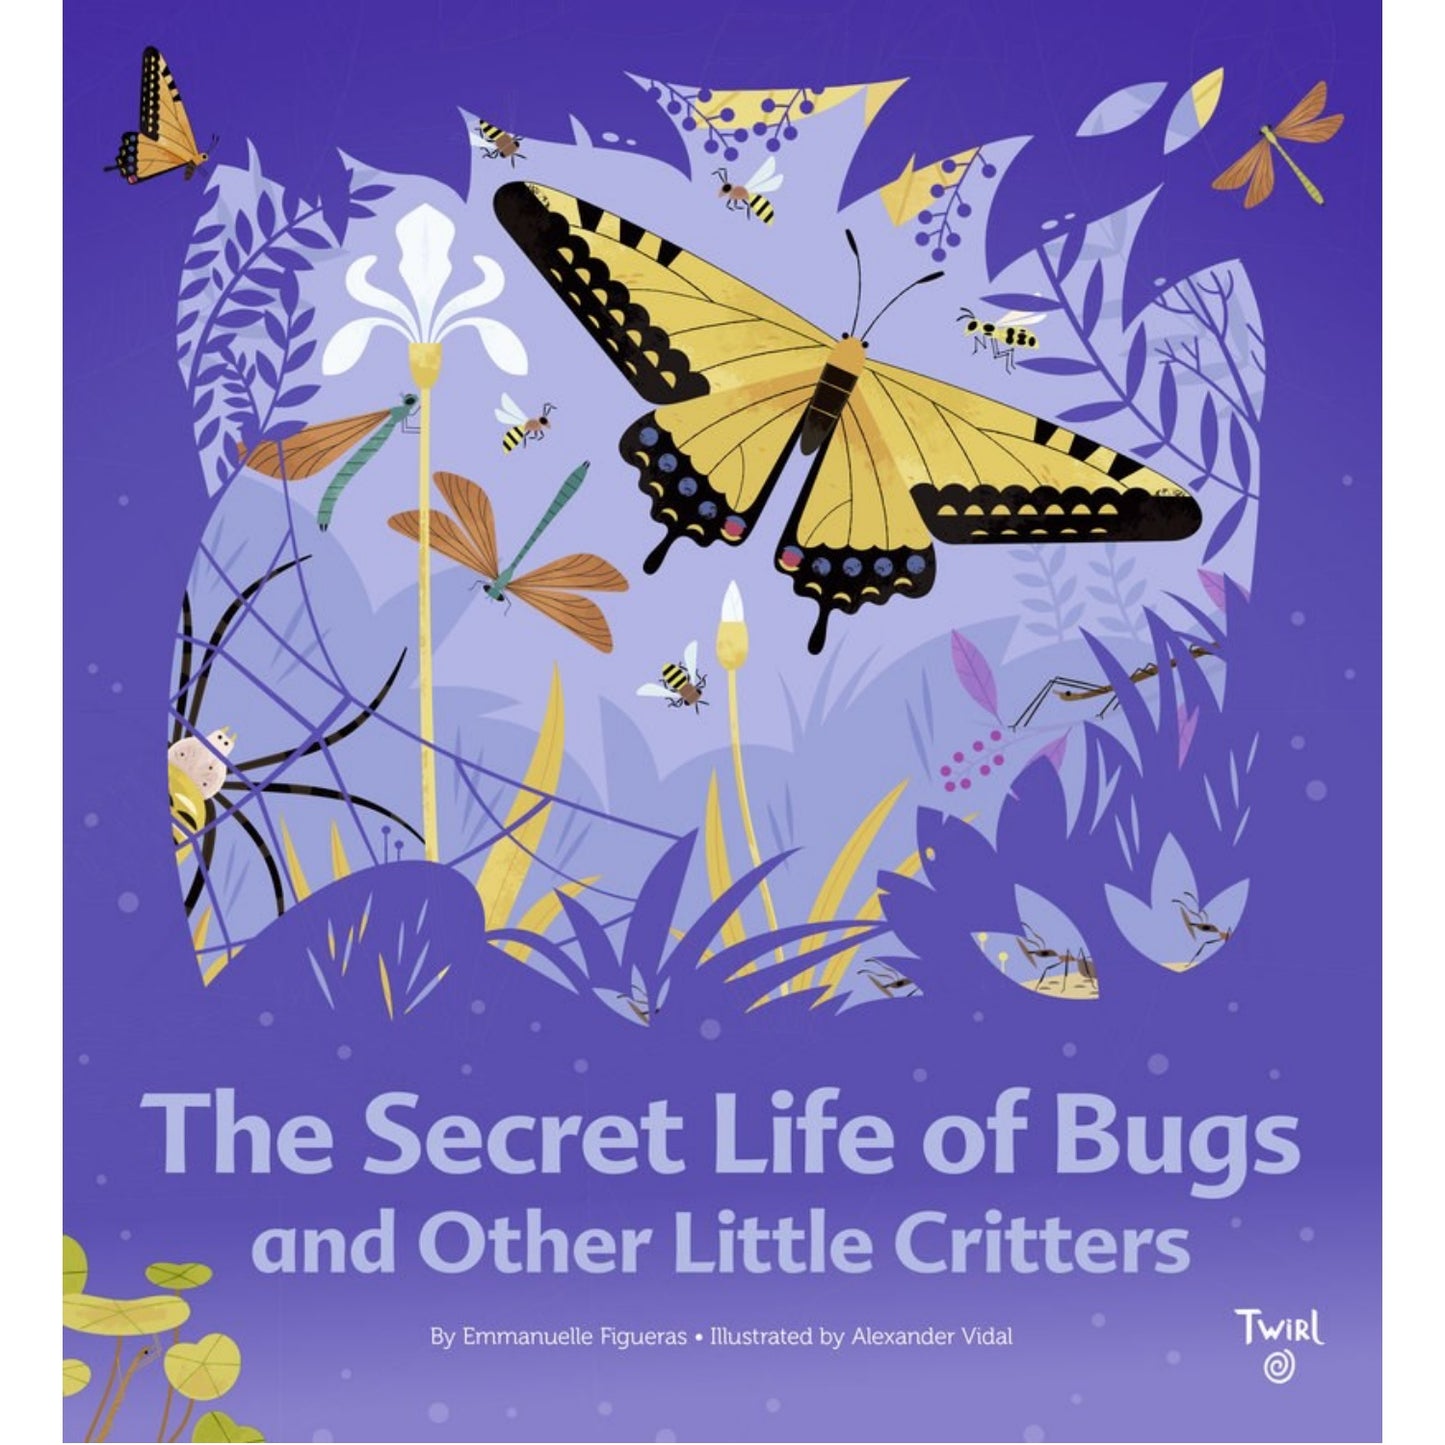 The Secret Life of Bugs | Hardcover | Children's Book on Nature